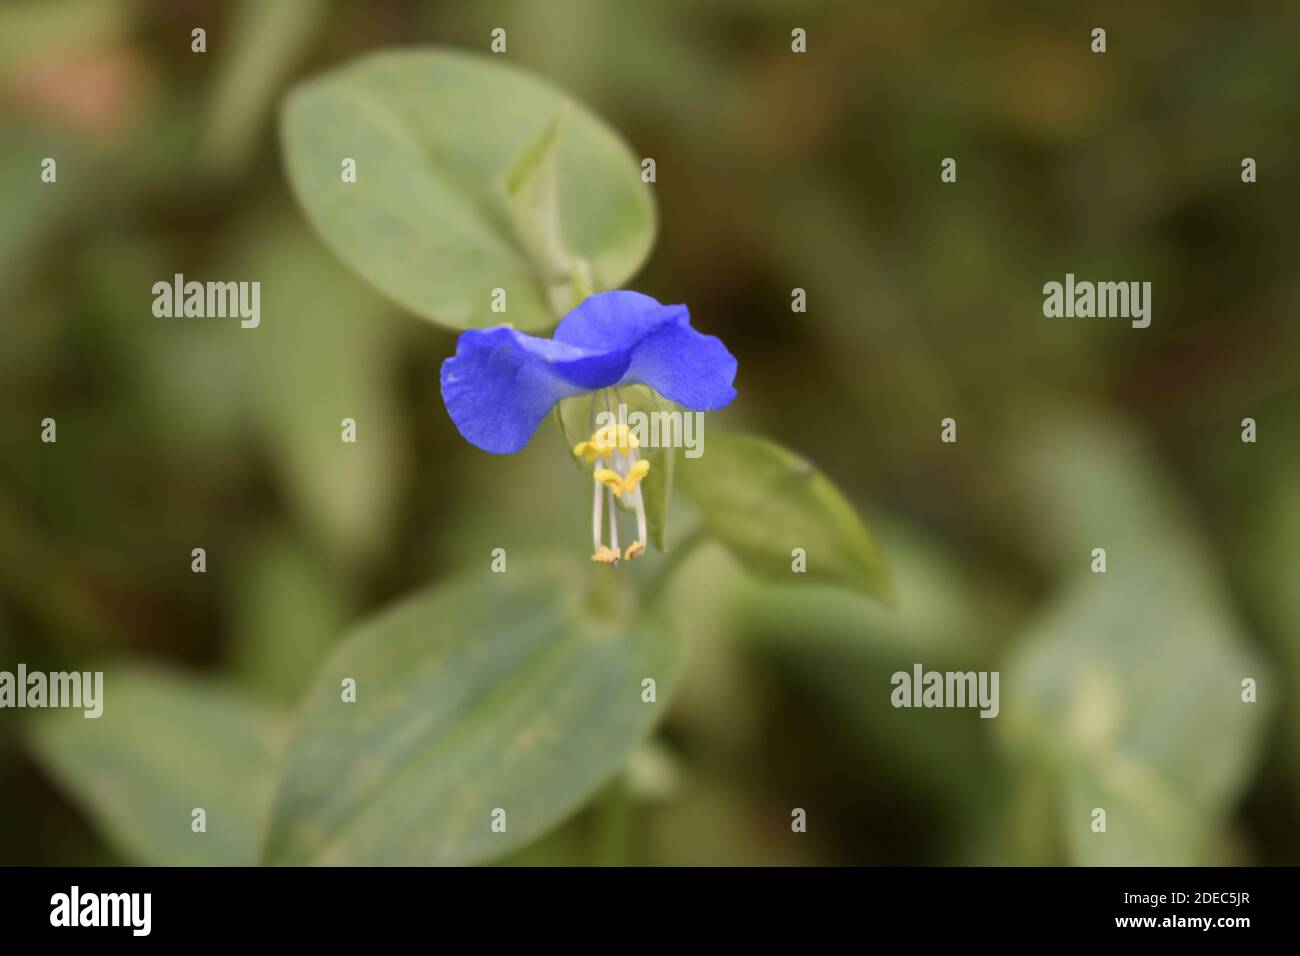 A closeup shot of a commelina communis on blurred background Stock Photo